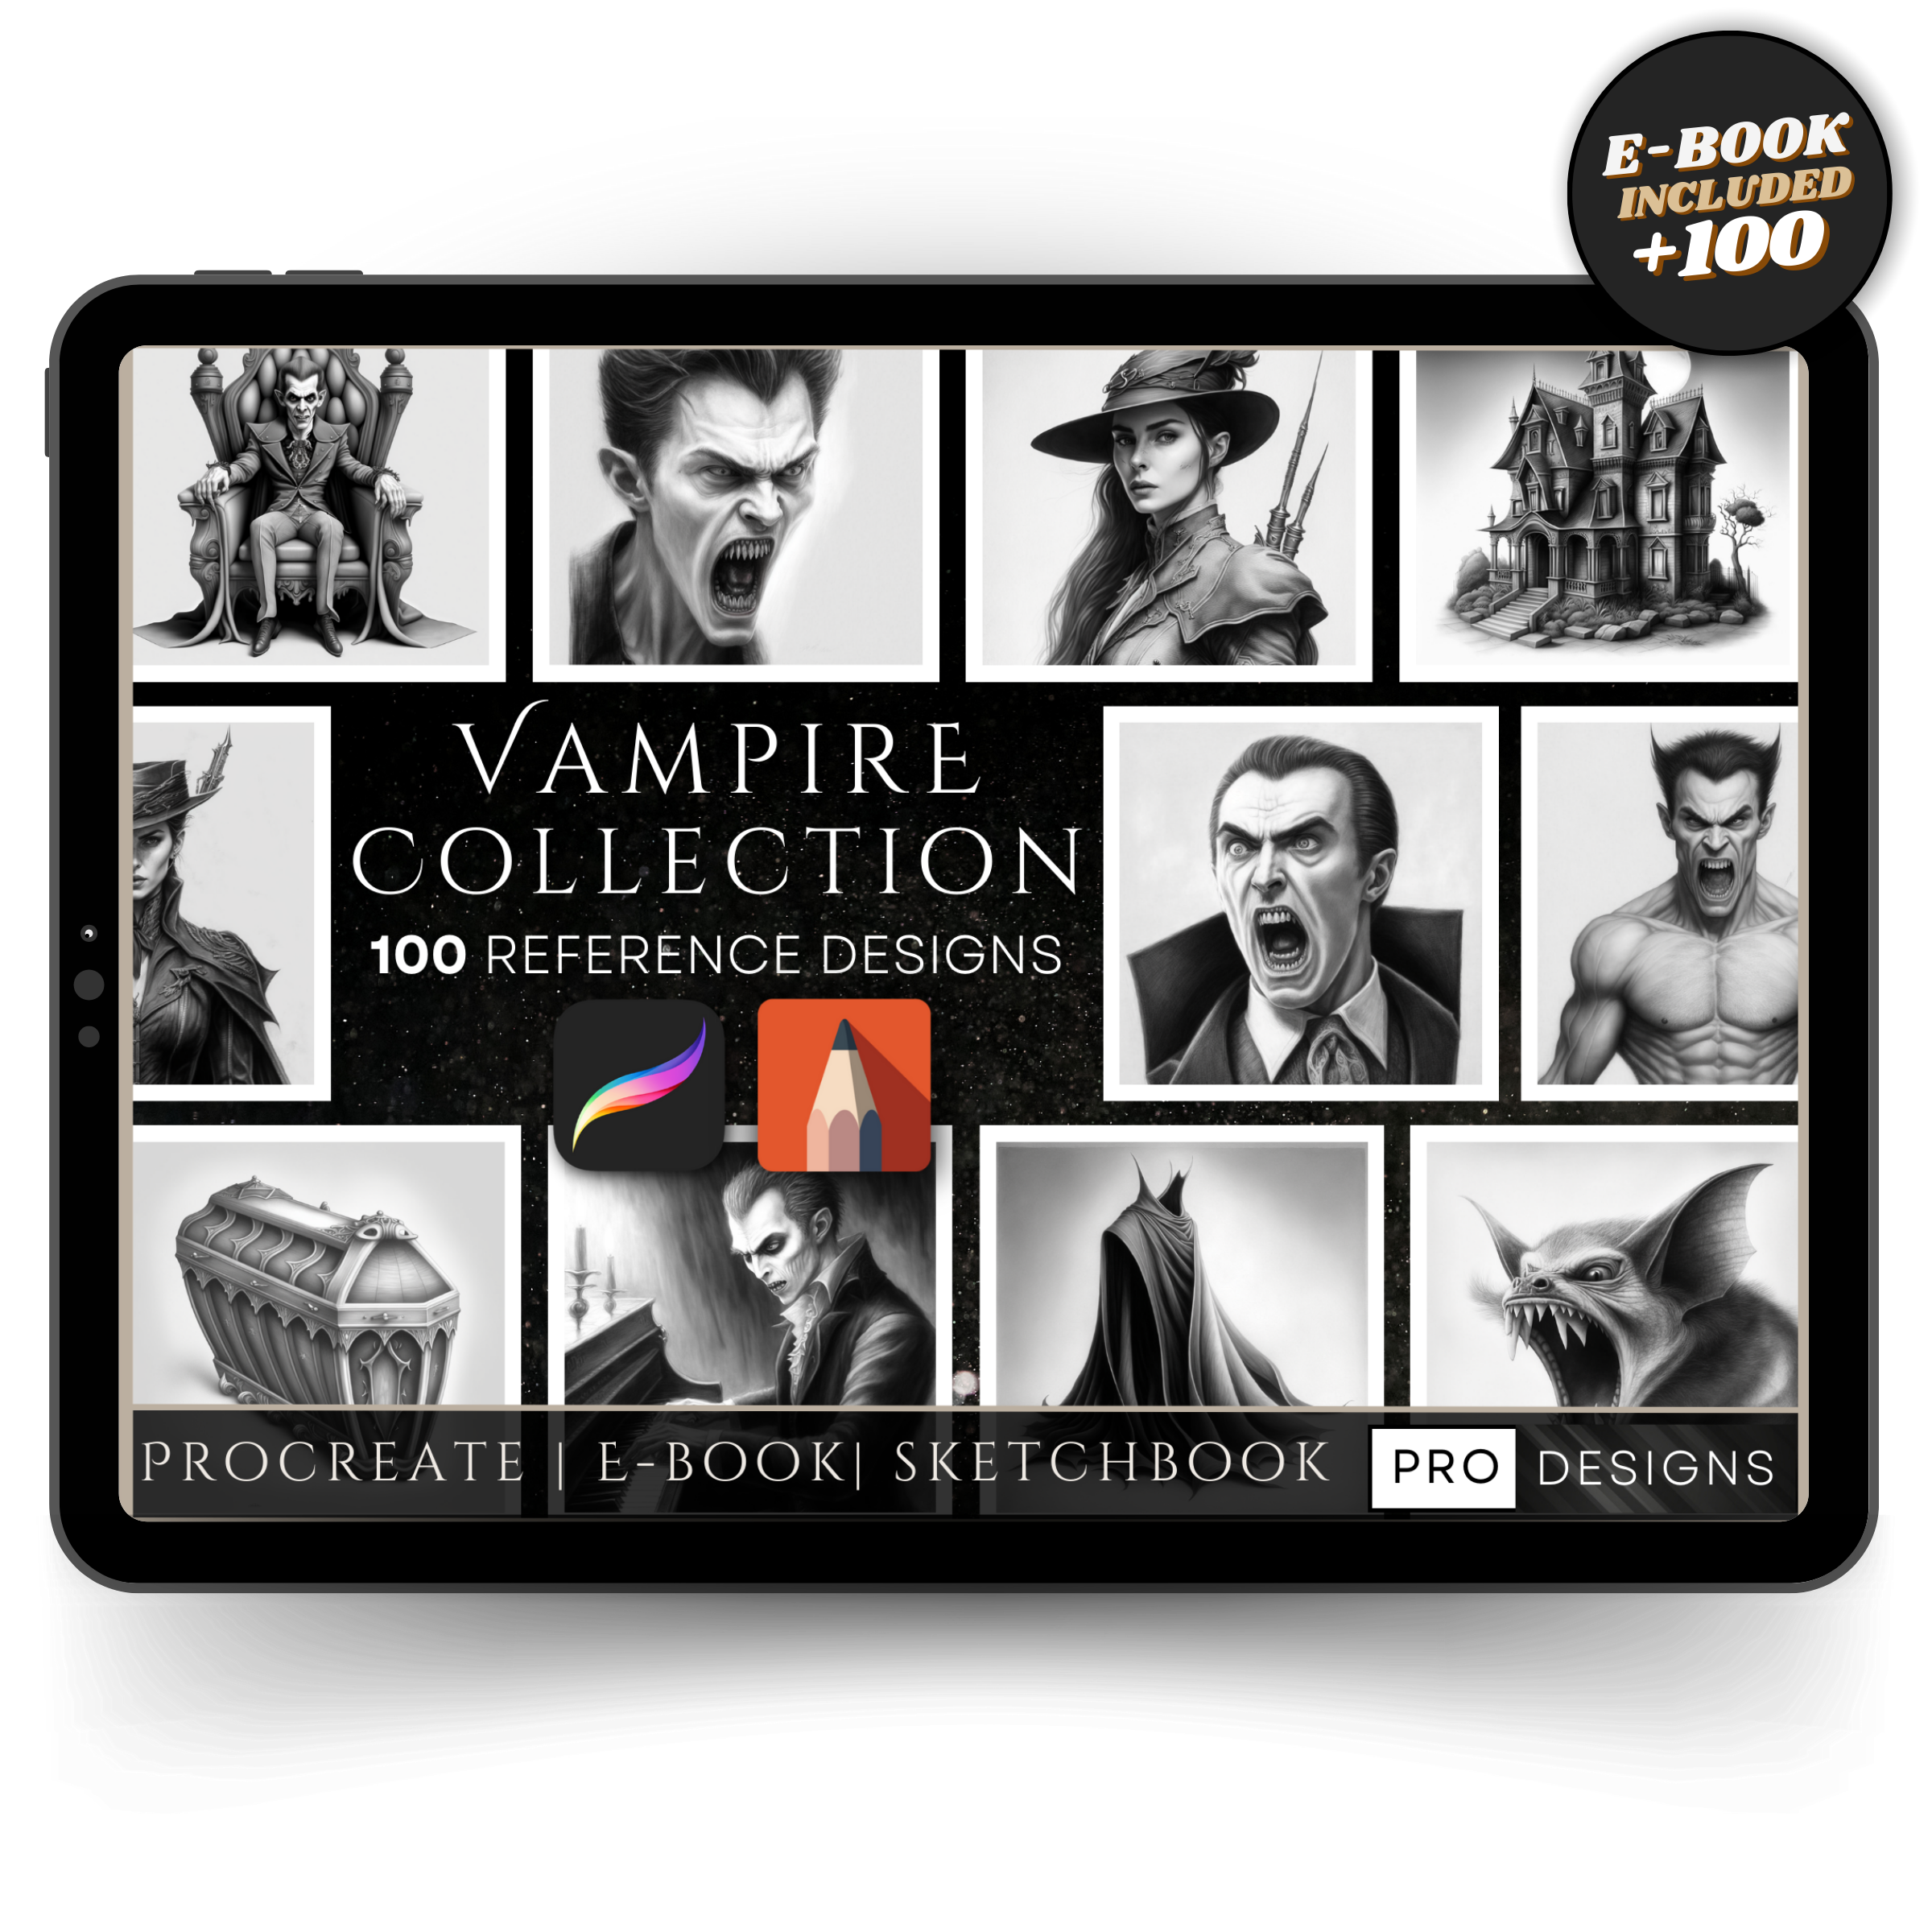 "Twilight Shadows" - The Vampire Collection